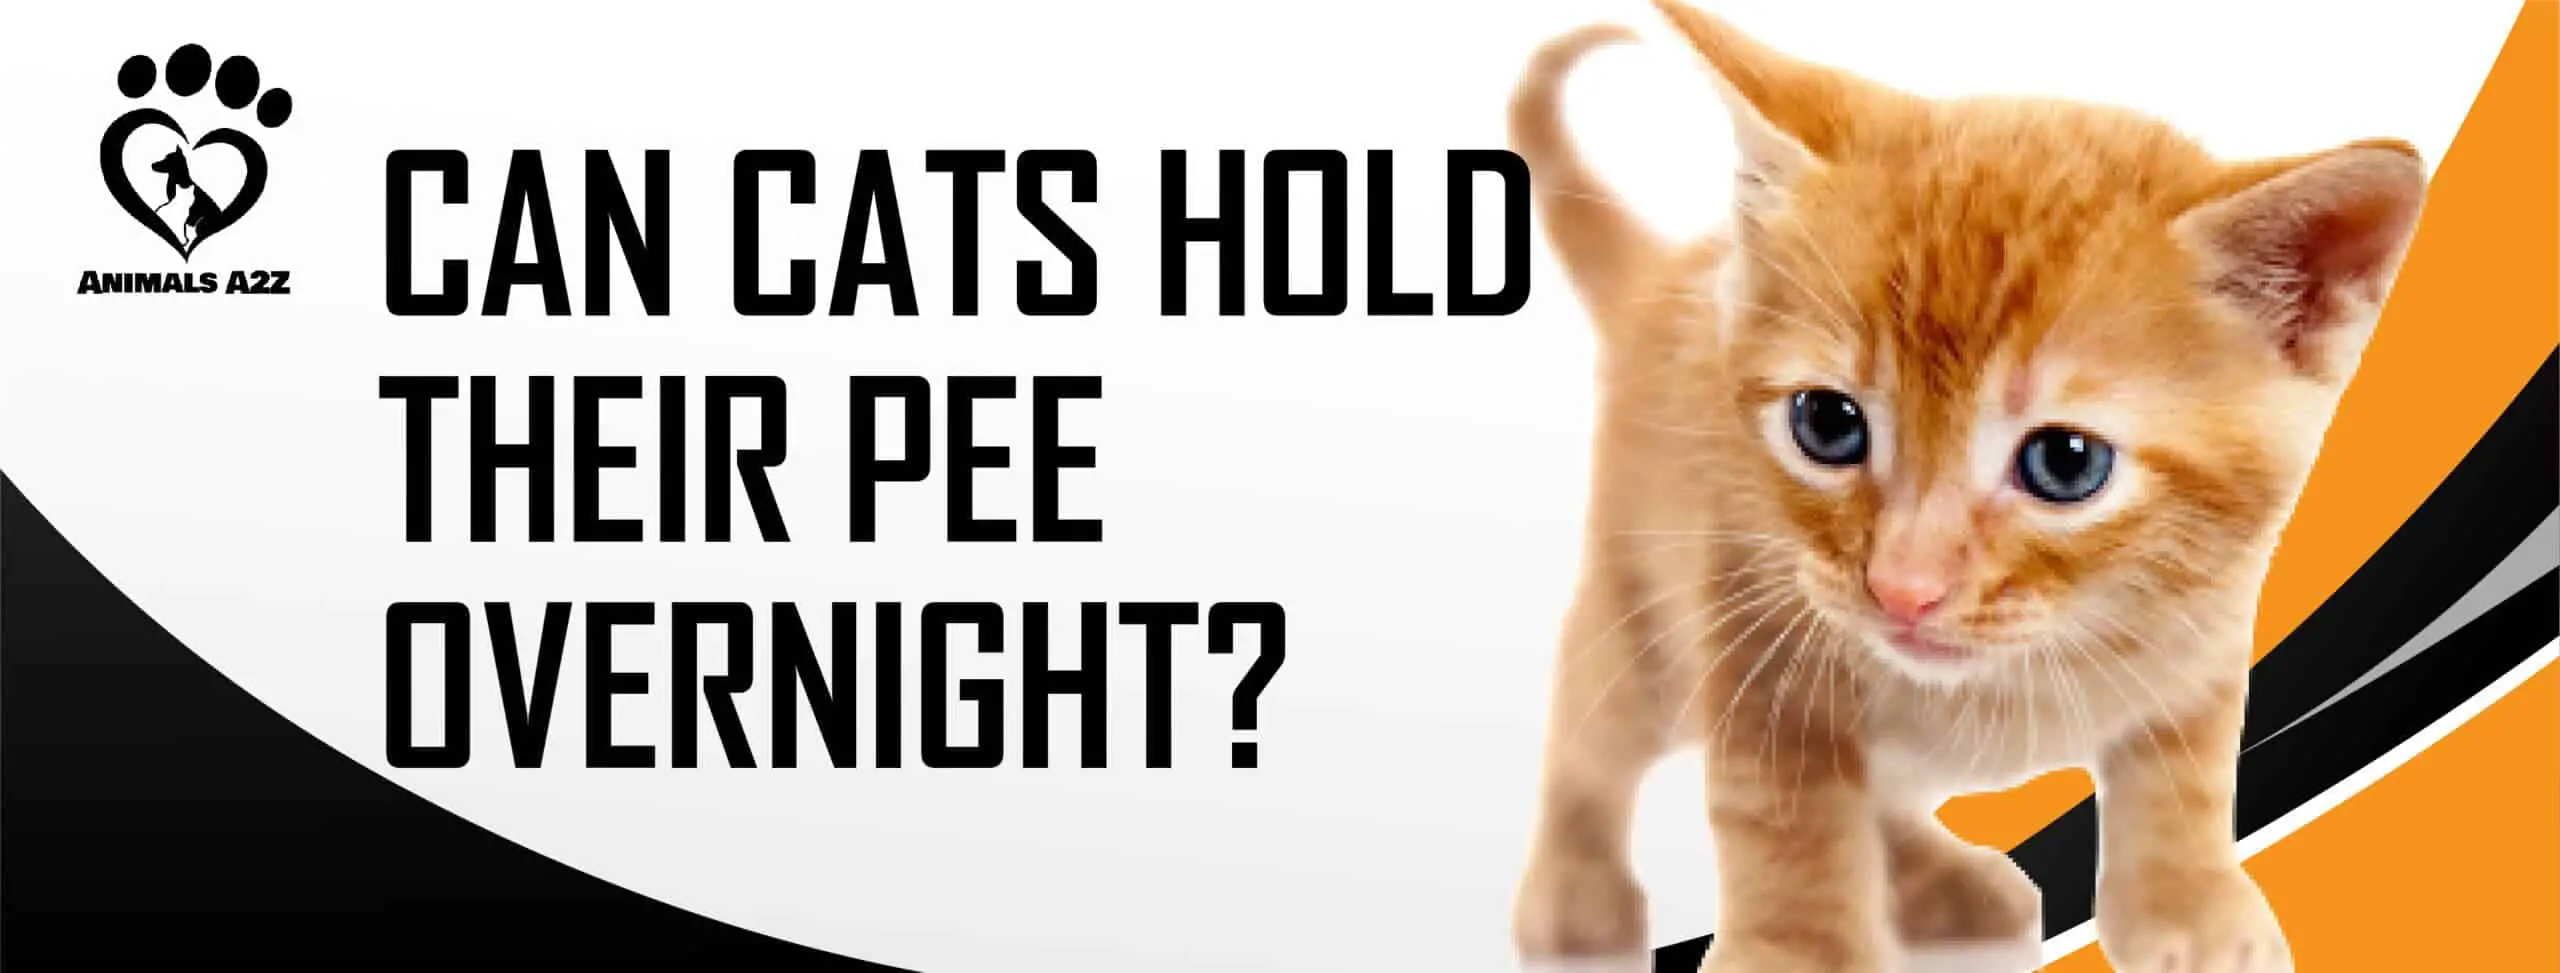 Can cats hold their pee overnight